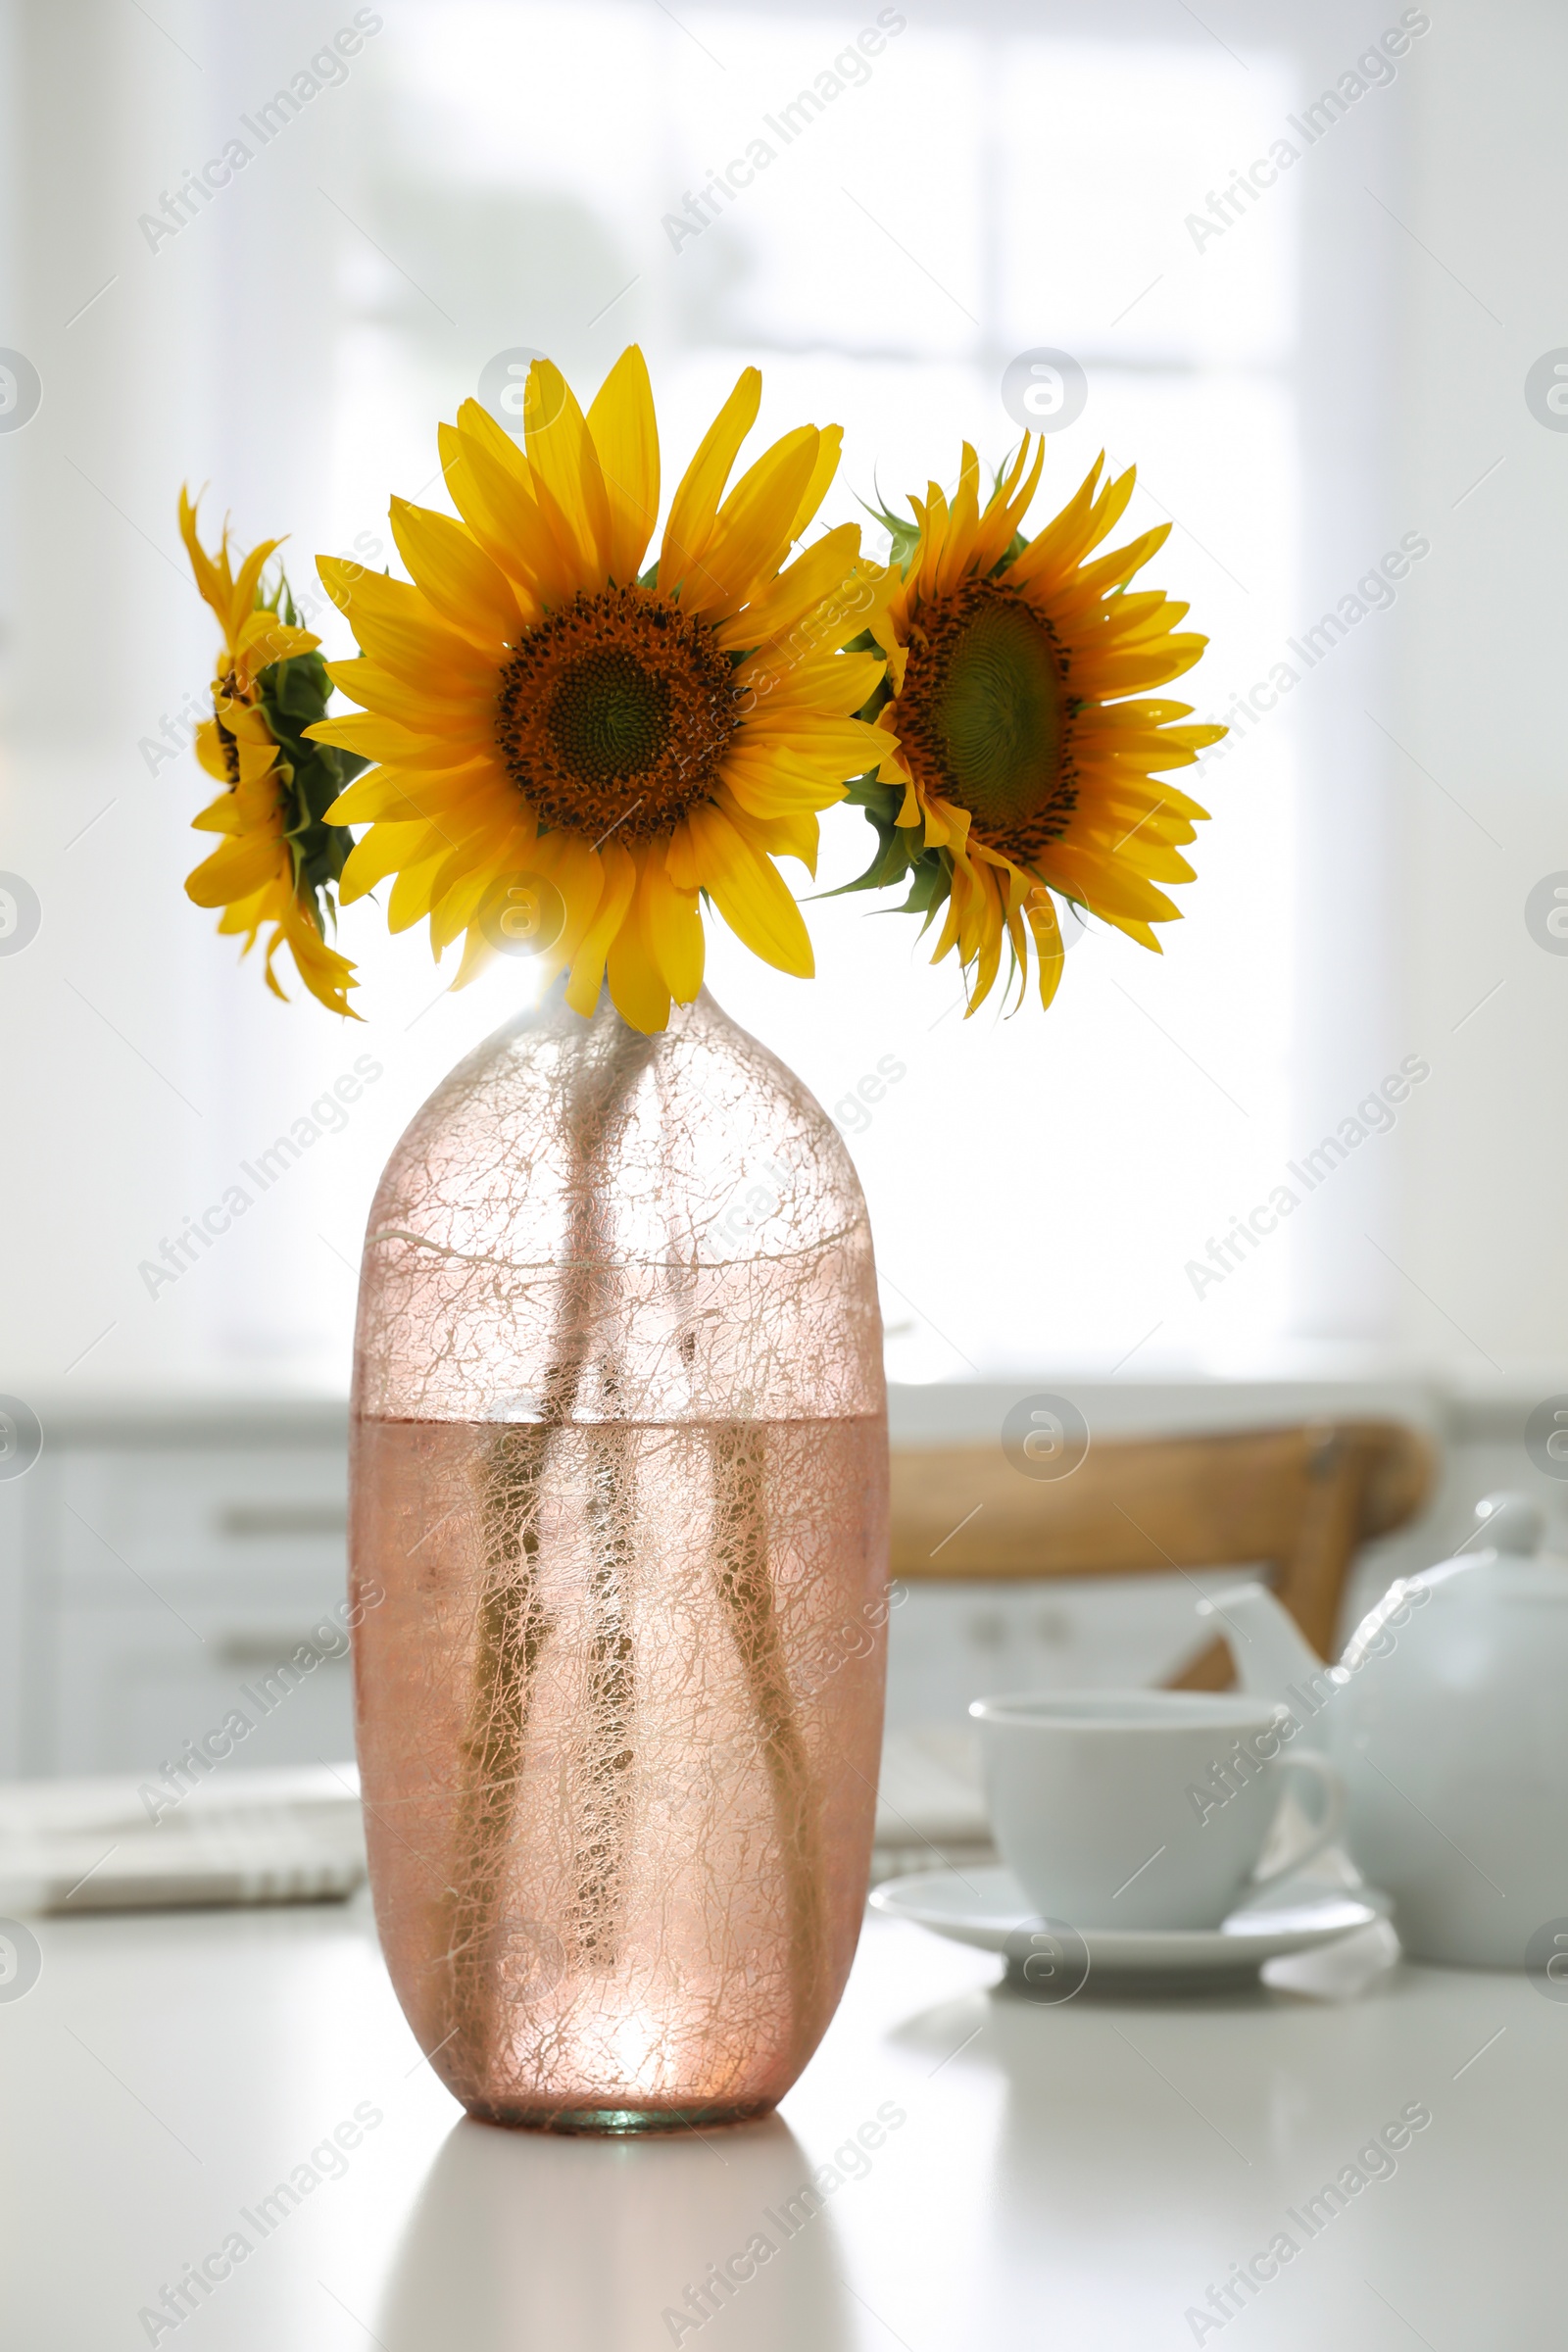 Photo of Bouquet of beautiful sunflowers on table in kitchen